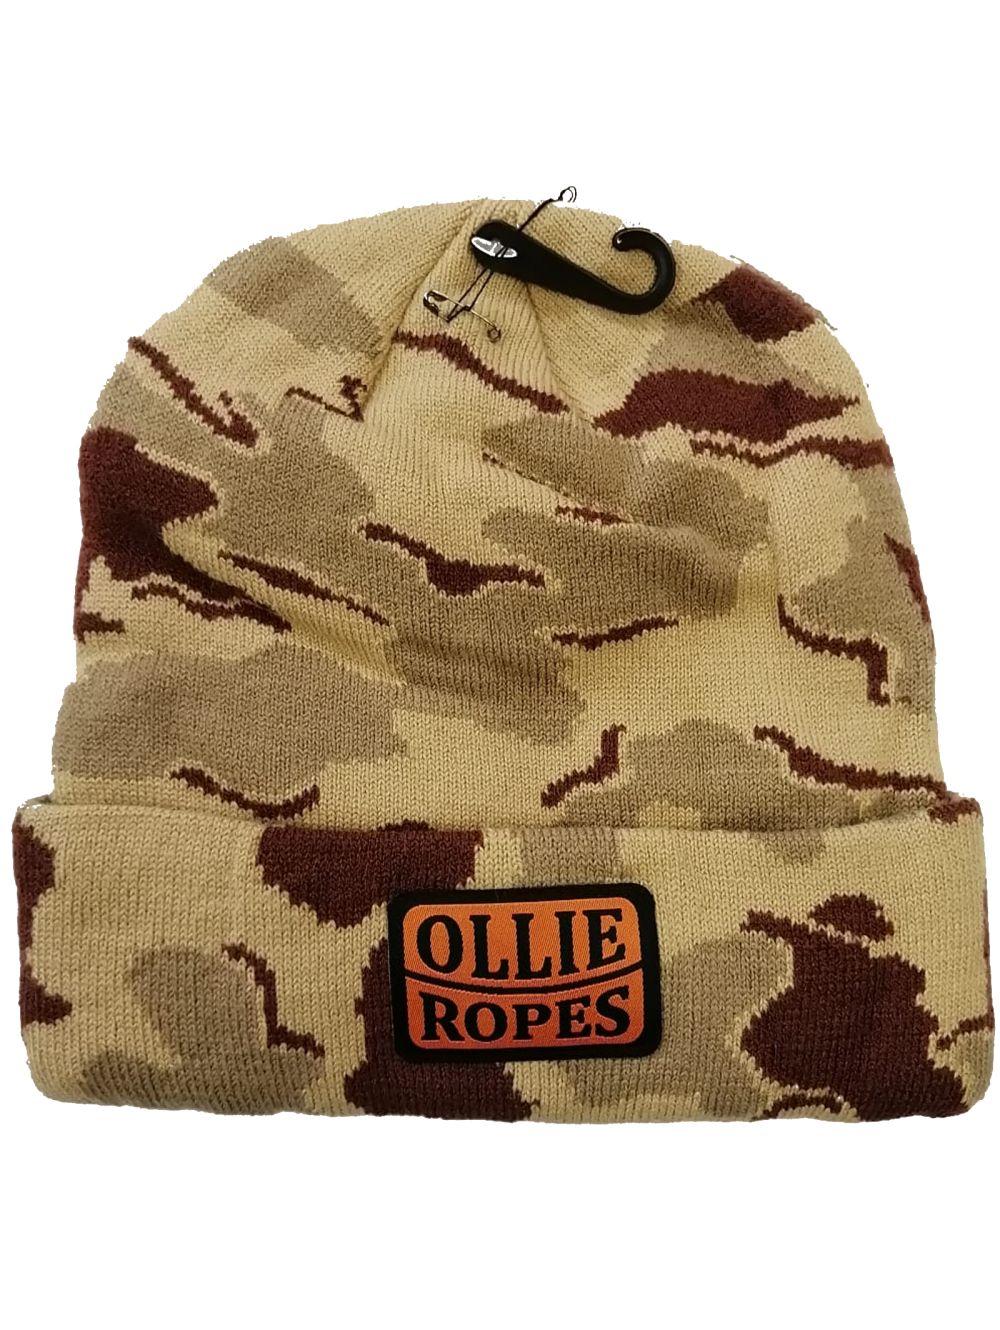 Rome Ollie Ropes muts camo